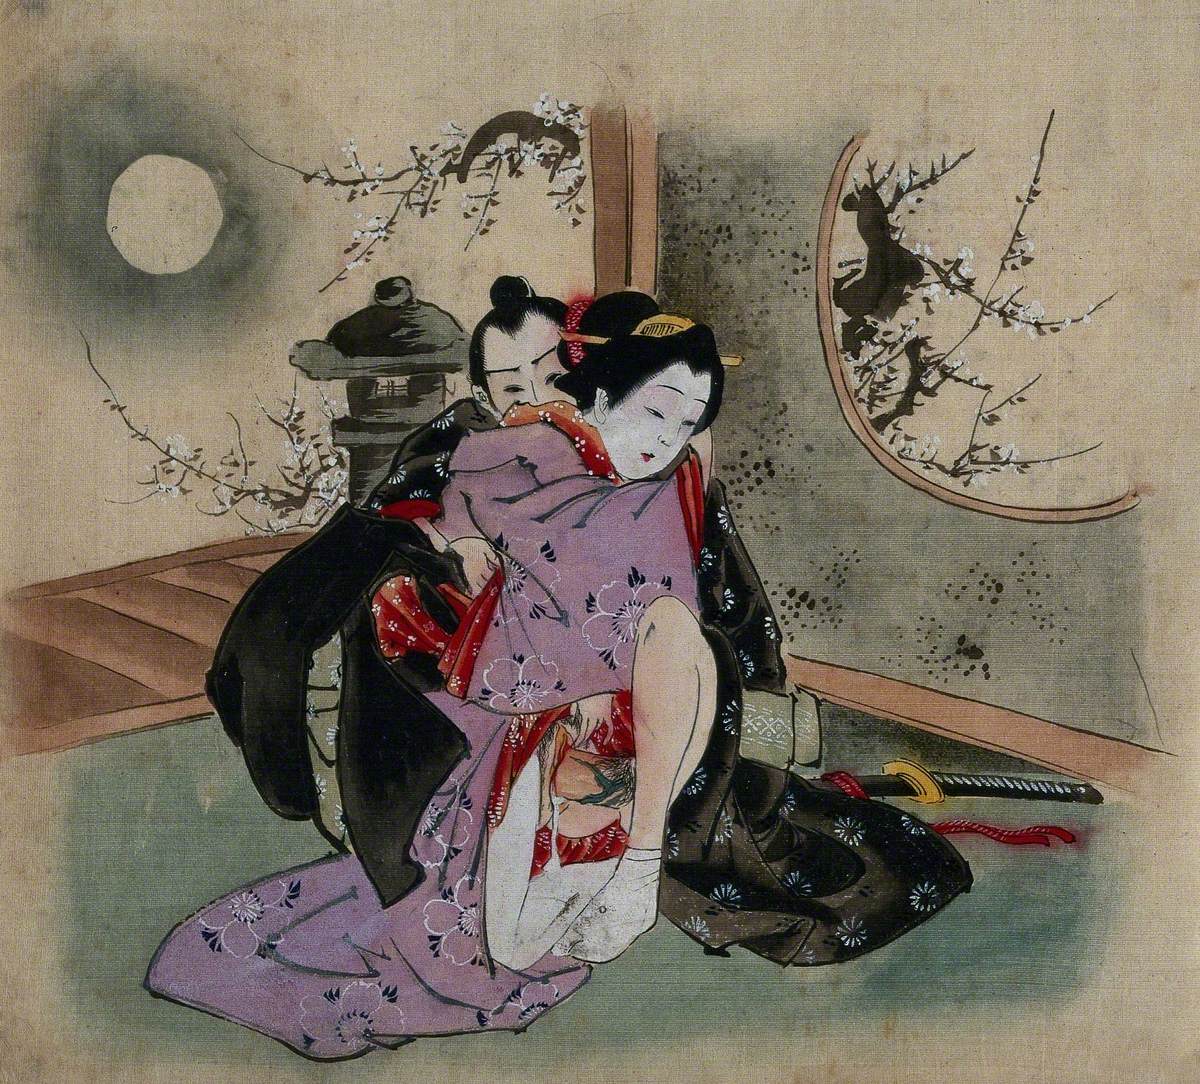 A Couple Making Love, outside the Room a Garden Is Seen by Moonlight